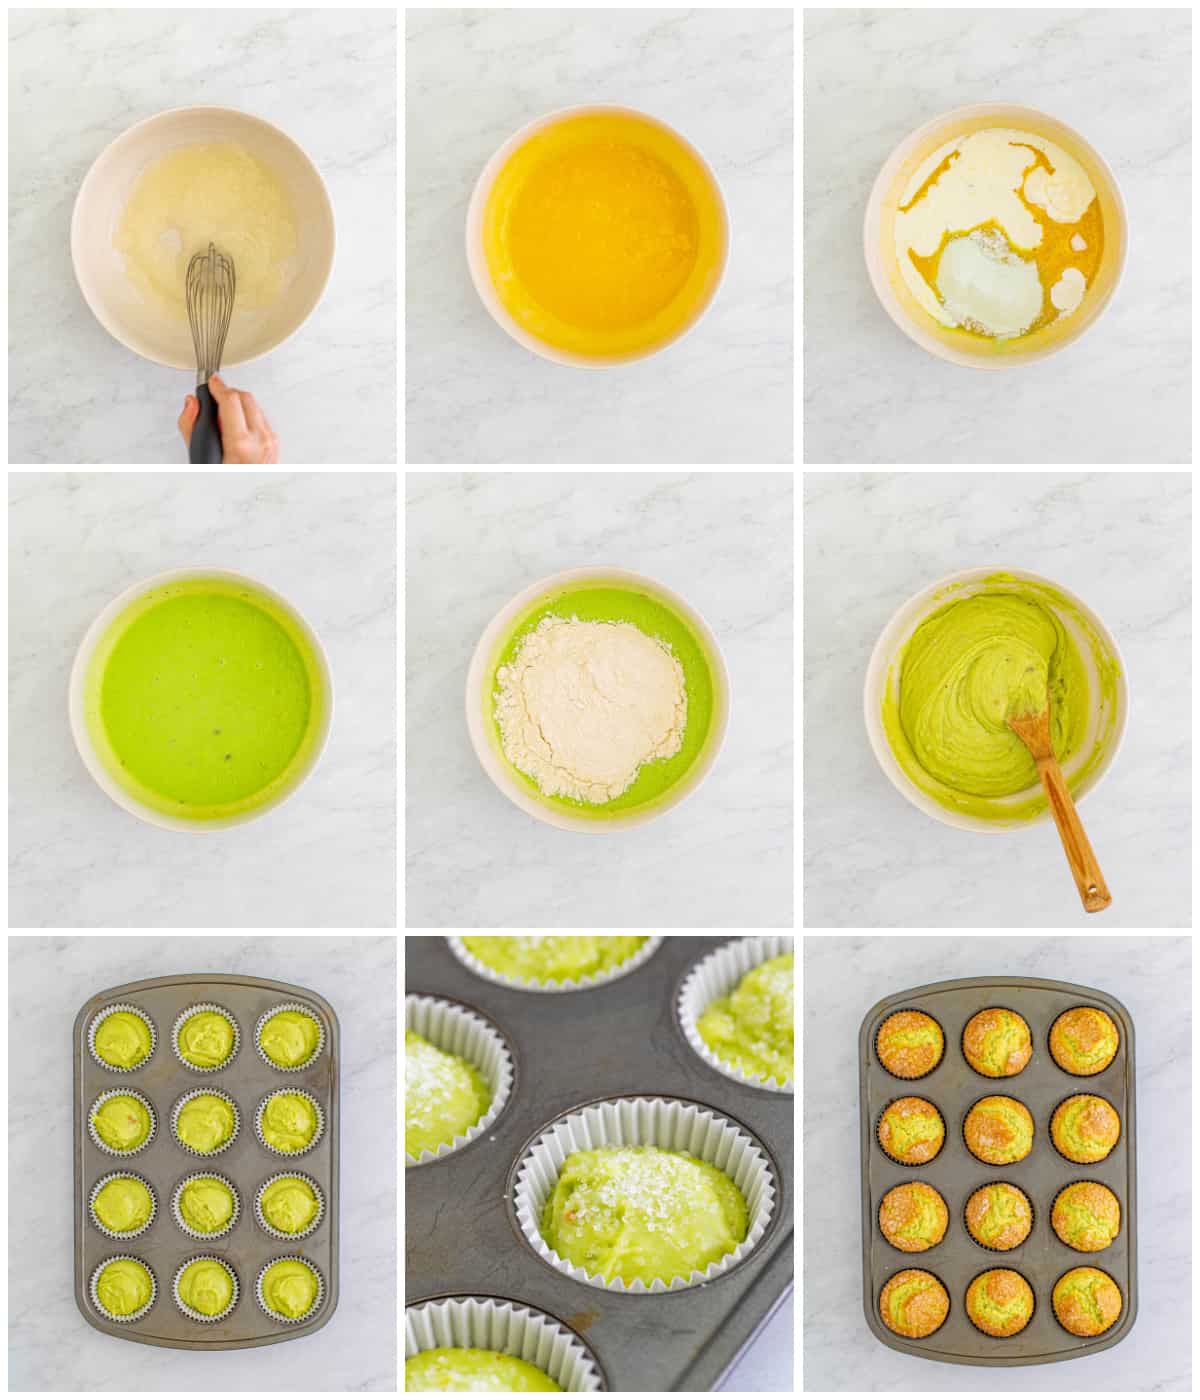 Step by step photos on how to make Pistachio Muffins.